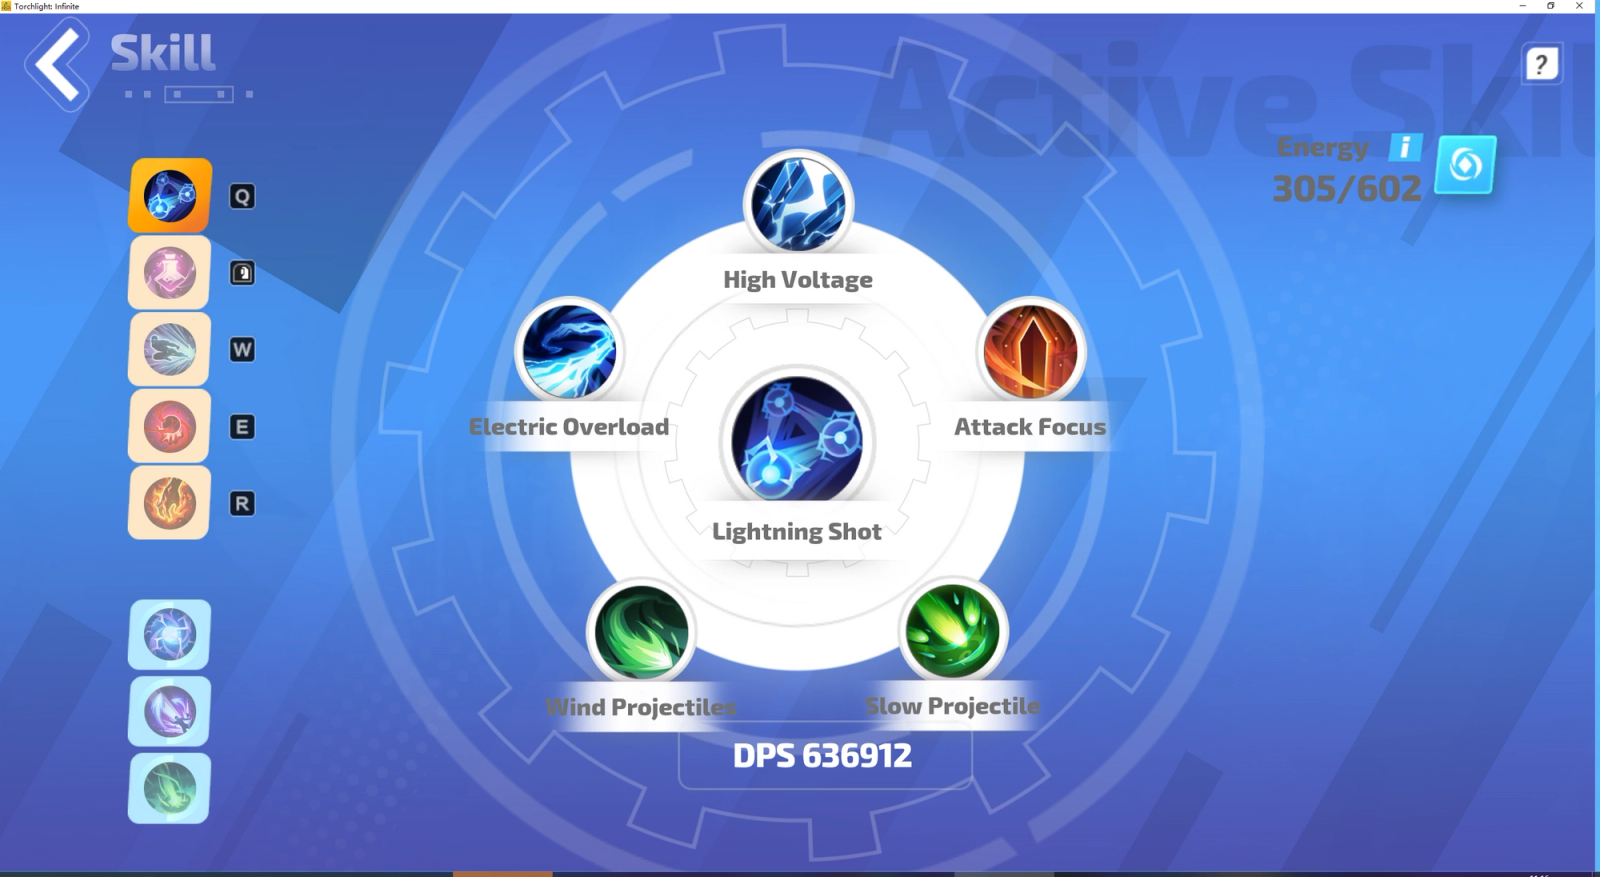 Picture of Carino's Lightning Shot ability screen in Torchlight Infinite